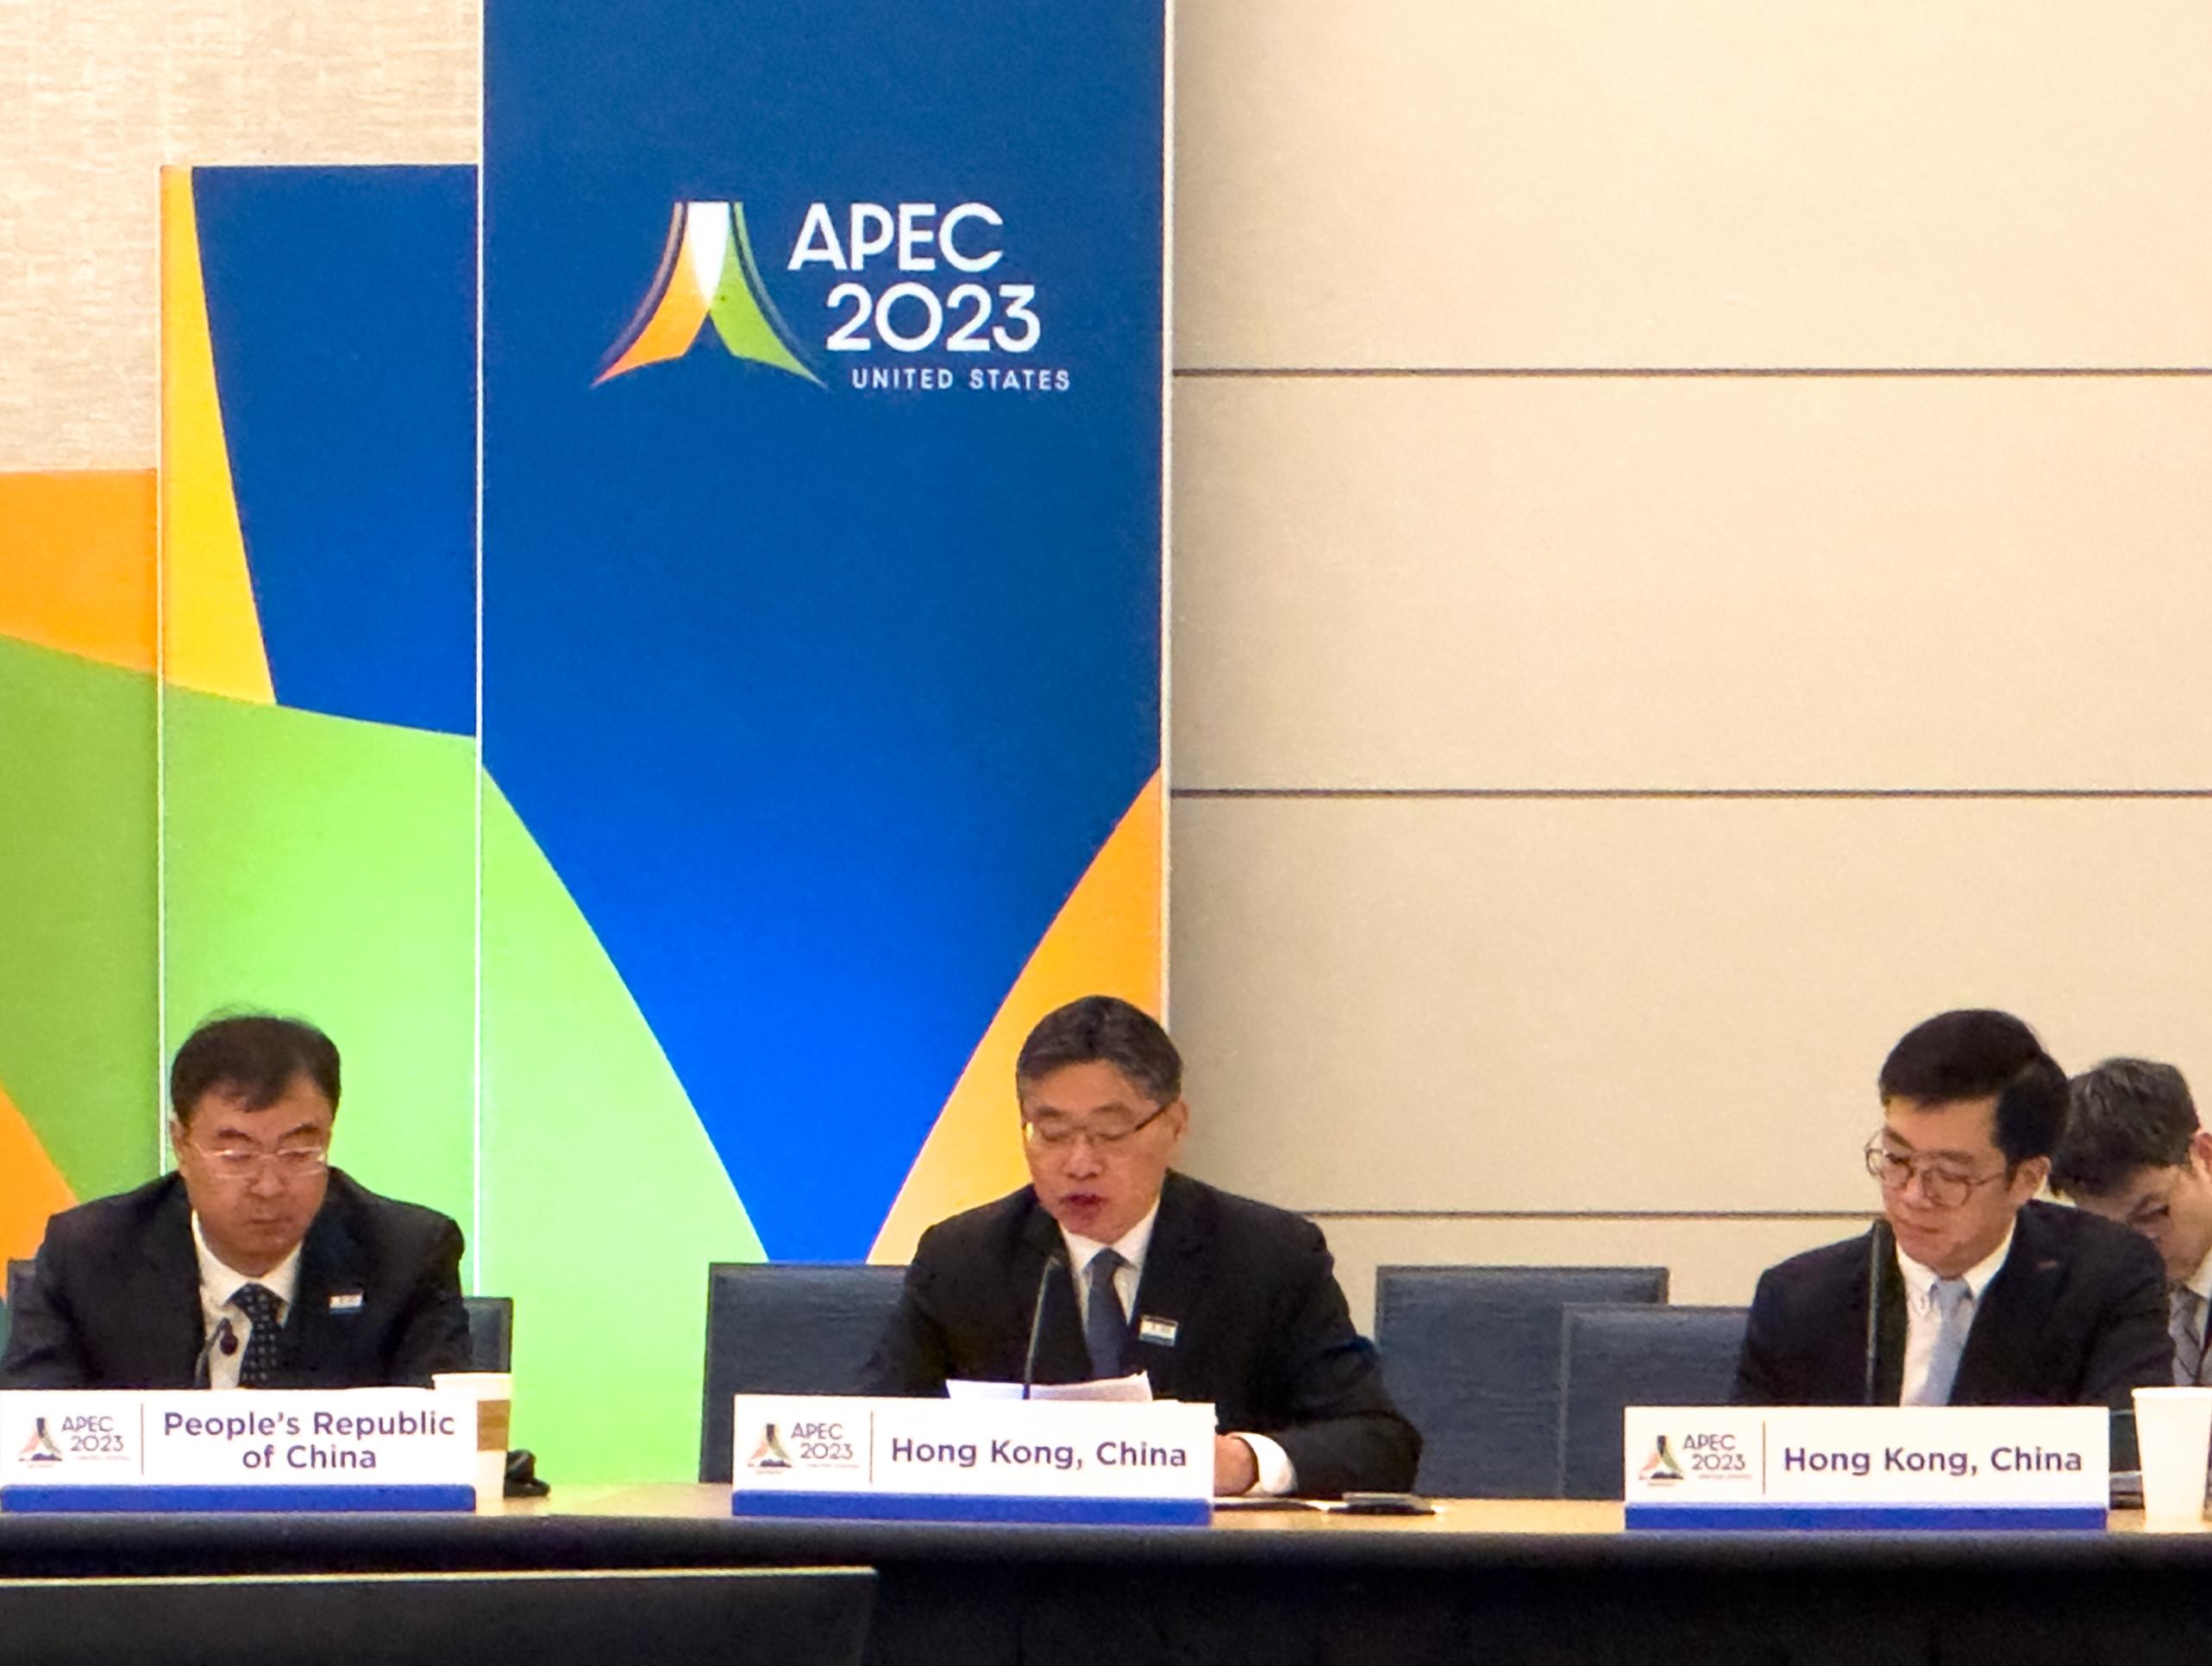 The Secretary for Transport and Logistics, Mr Lam Sai-hung, attended the 11th Asia-Pacific Economic Cooperation Transportation Ministerial Meeting, under the theme of "Creating a Resilient and Sustainable Future for All", in Detroit, the United States (US), today (May 16, US time). Photo shows Mr Lam (centre) speaking at a session on supply chain resilience.